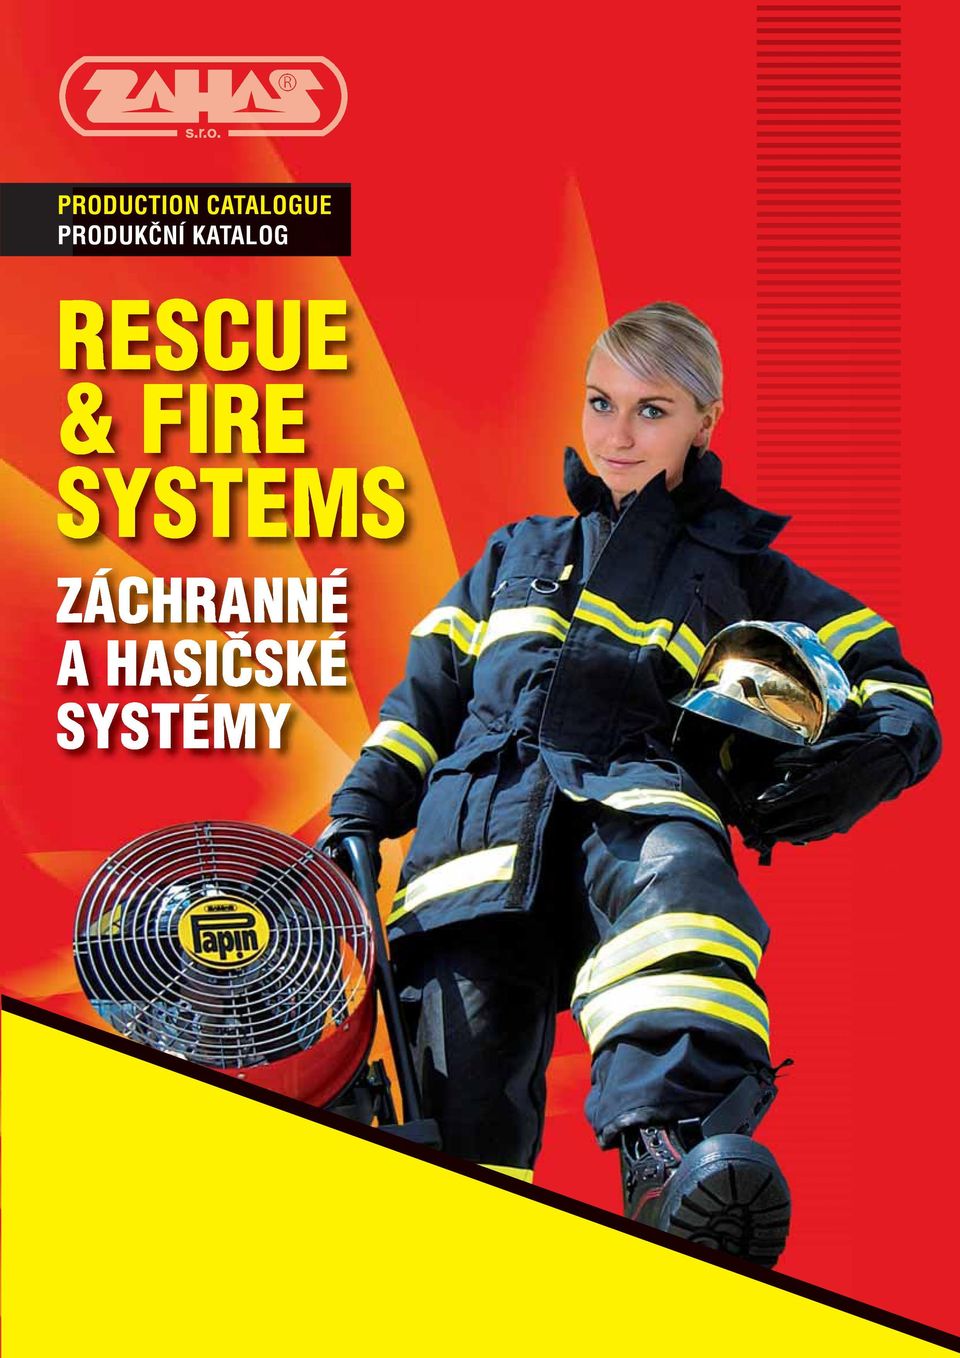 RESCUE & FIRE SYSTEMS